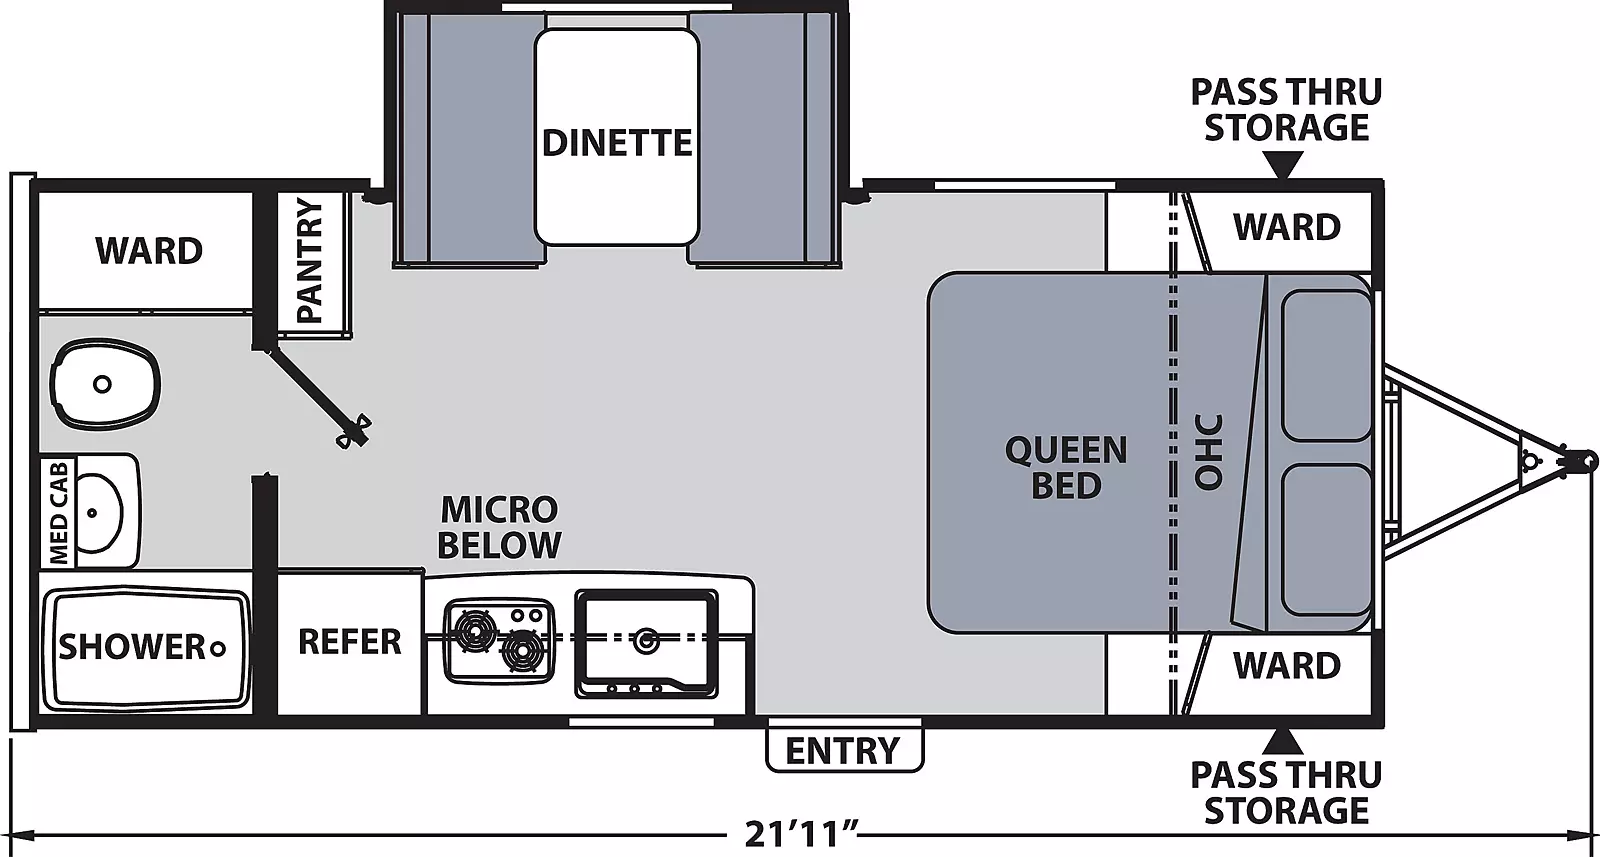 The 191RBS has one slide out on the off-door side and one entry door on the door side. Interior layout from front to back: front bedroom containing foot facing queen bed, overhead cabinet, and wardrobes on either side of bed. Kitchen living dining area with off- door side slide out containing dinette. Kitchen on the door side containing sink, cook top stove, overhead cabinet, microwave below, and refrigerator; pantry on off door side. Rear bathroom containing shower, medicine cabinet, toilet and wardrobe storage. 